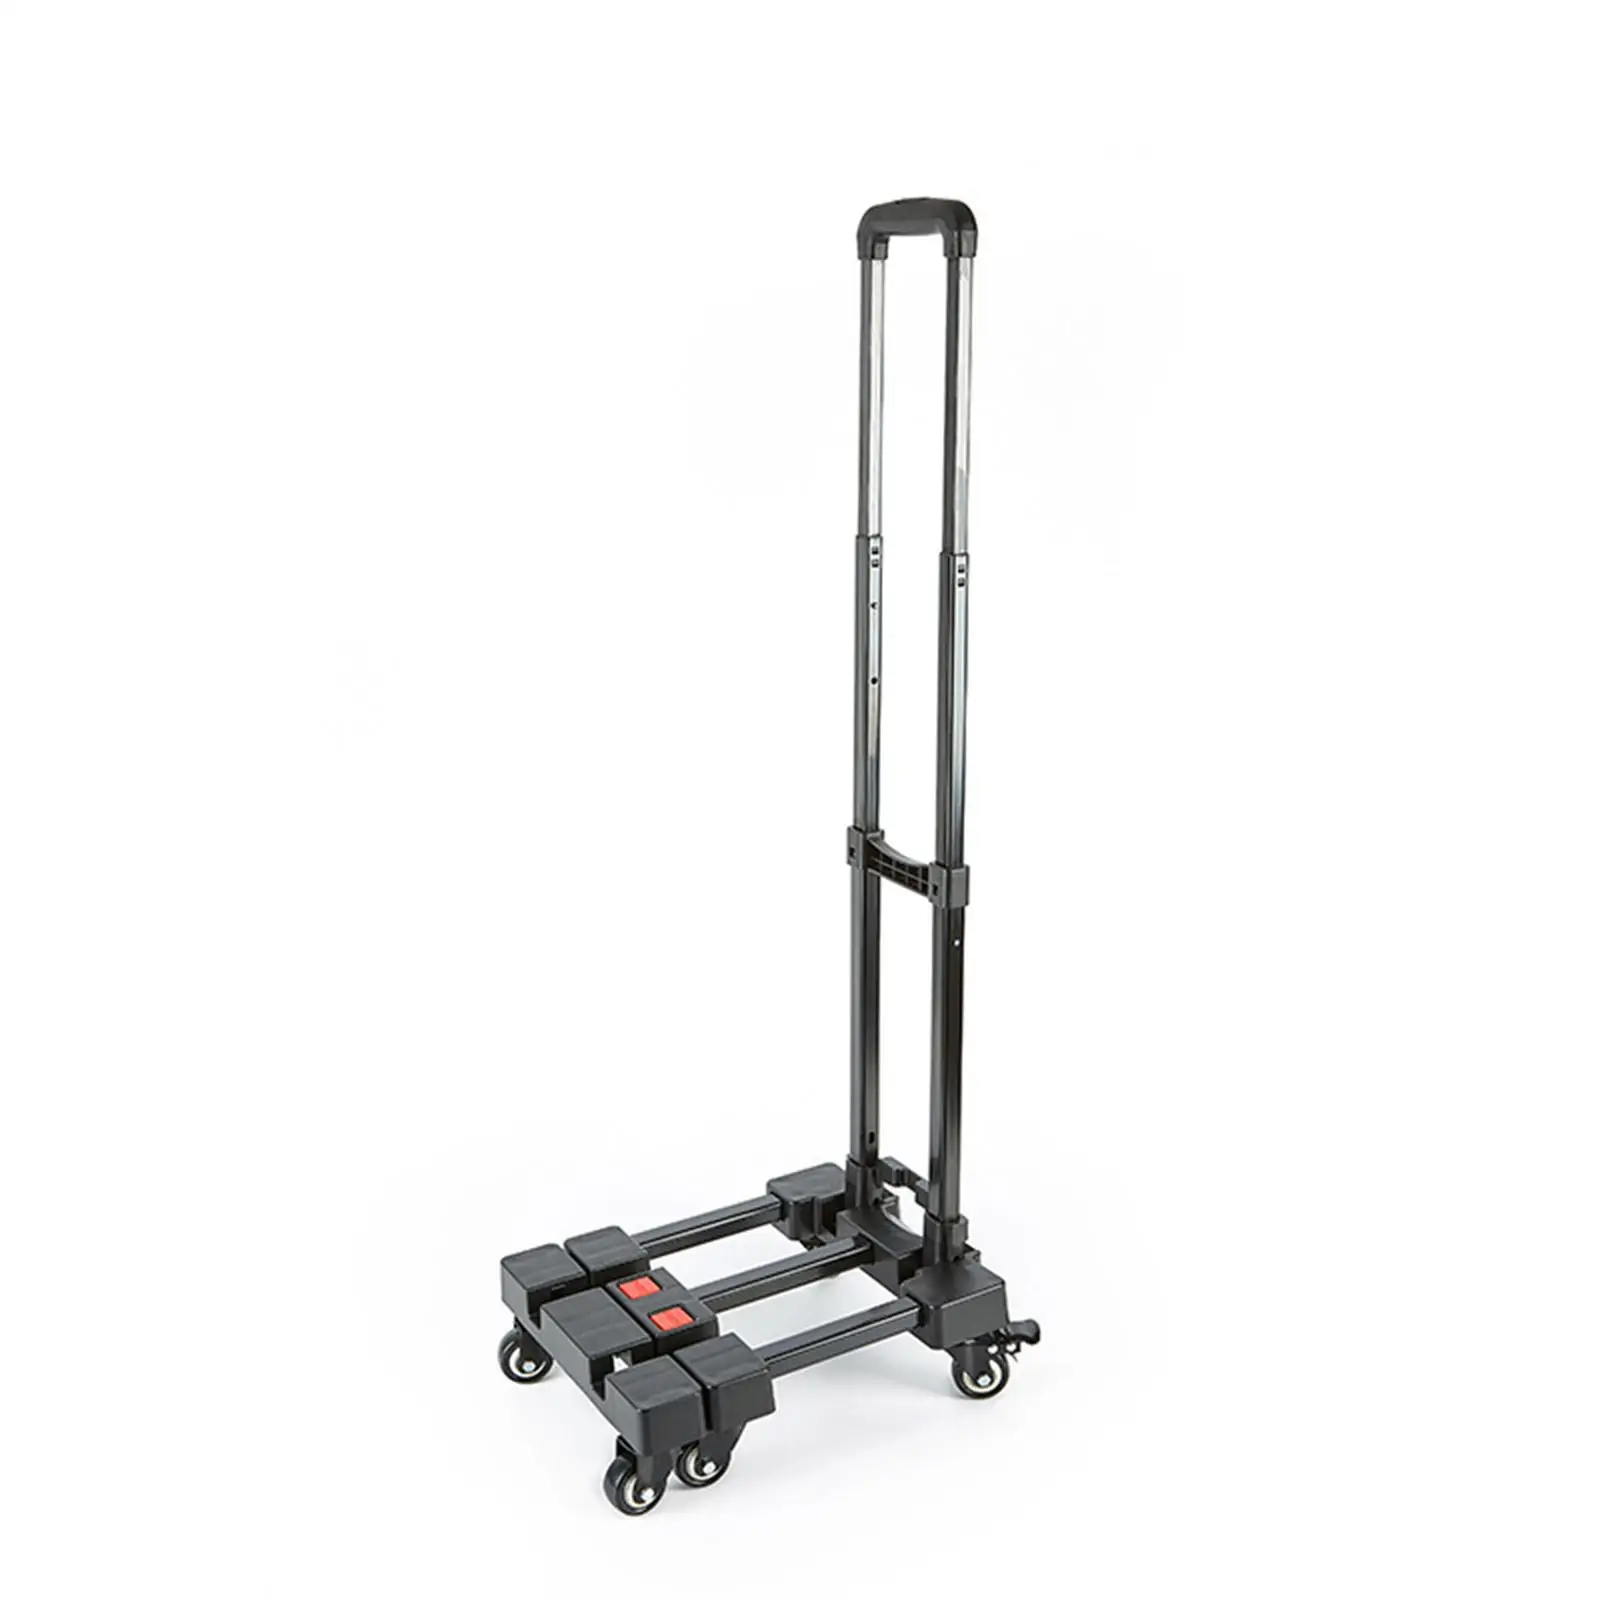 Folding Hand Truck Strong Compact Furniture Moving Trolley for Moving Shopping Travel Transportation Maximum Load 100kg (220lb)